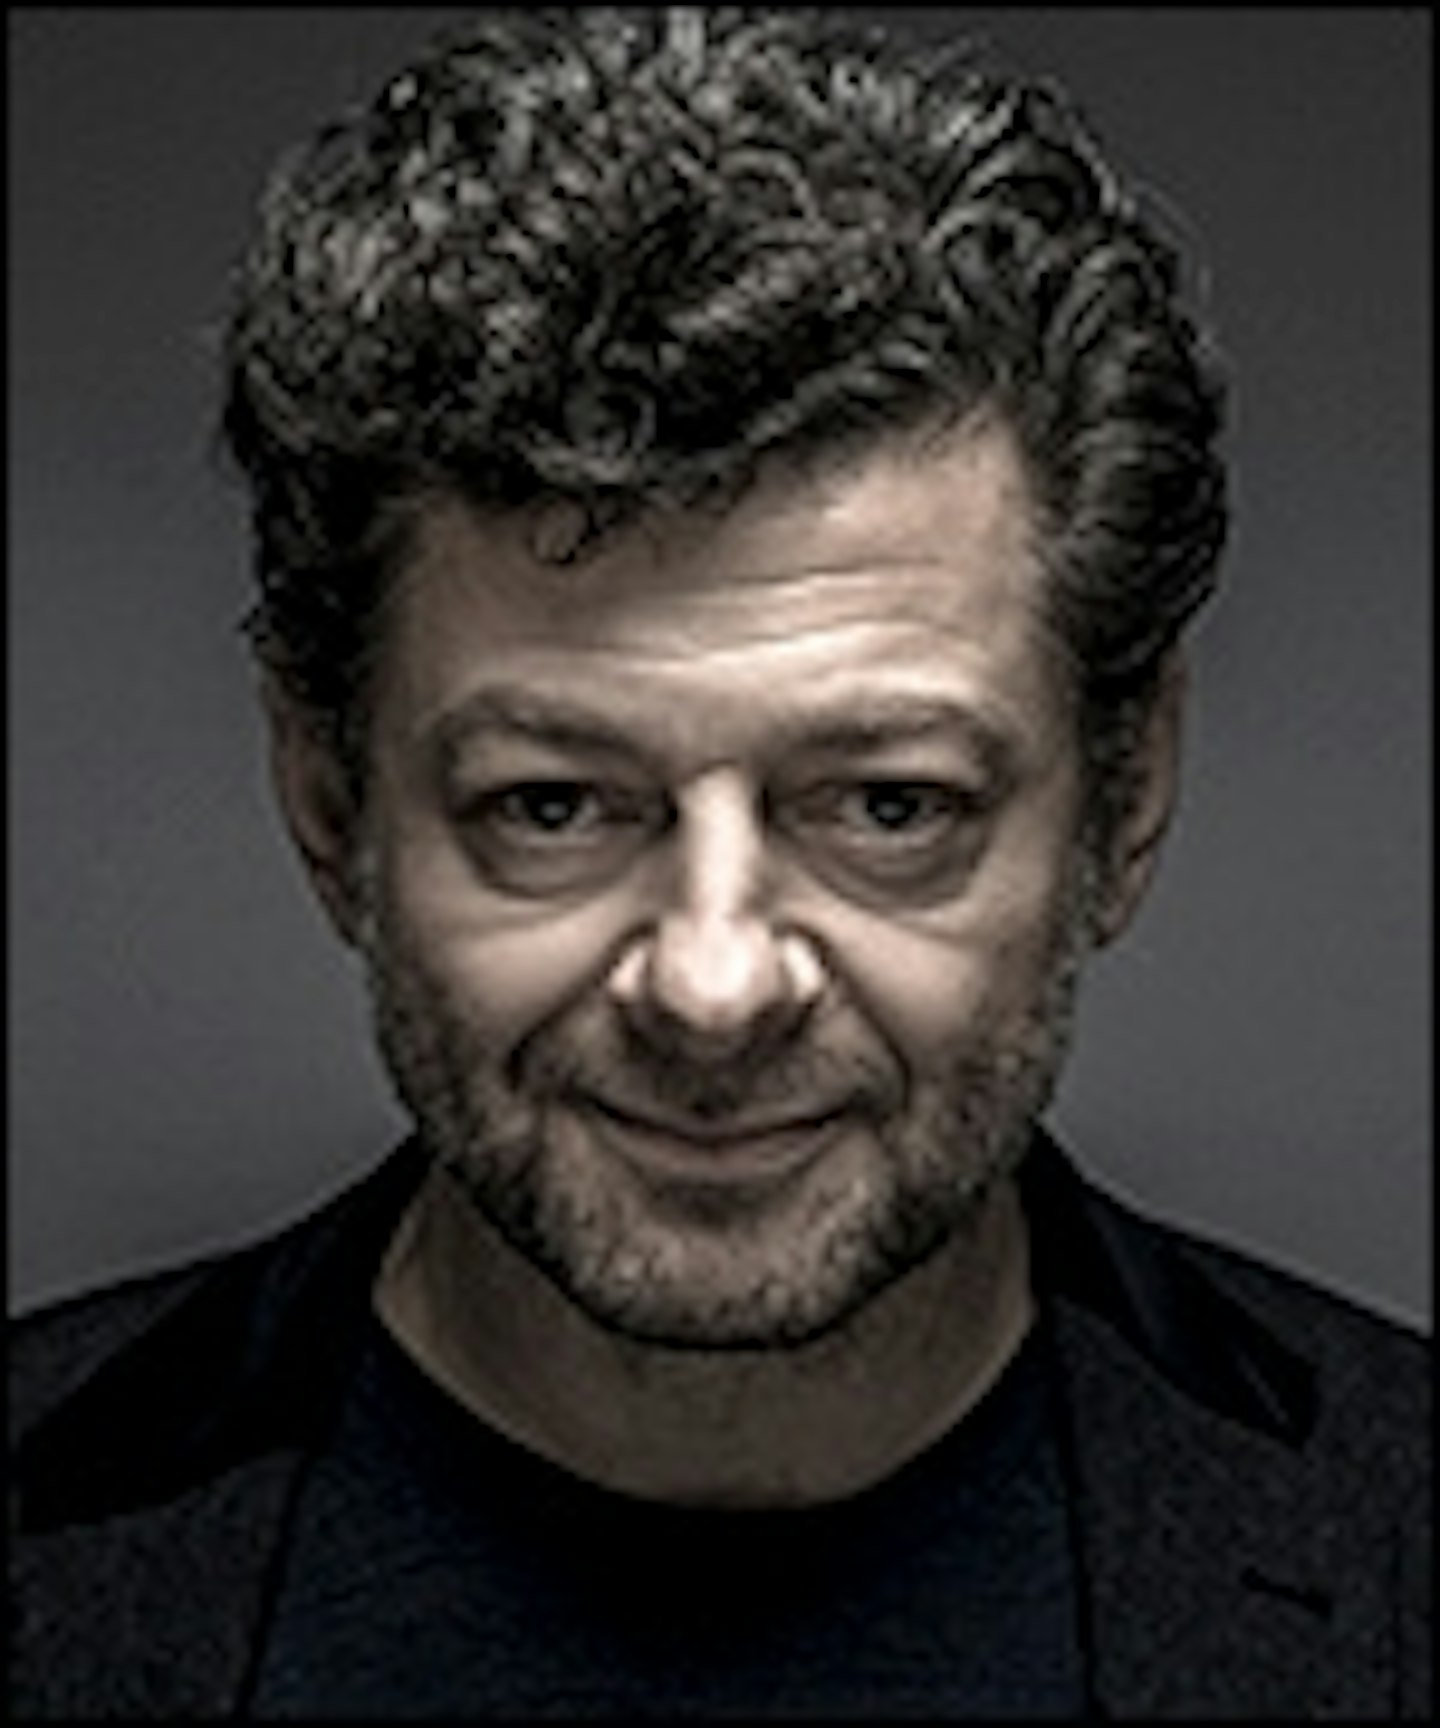 Andy Serkis Confirms It's His Voice In The Star Wars Trailer